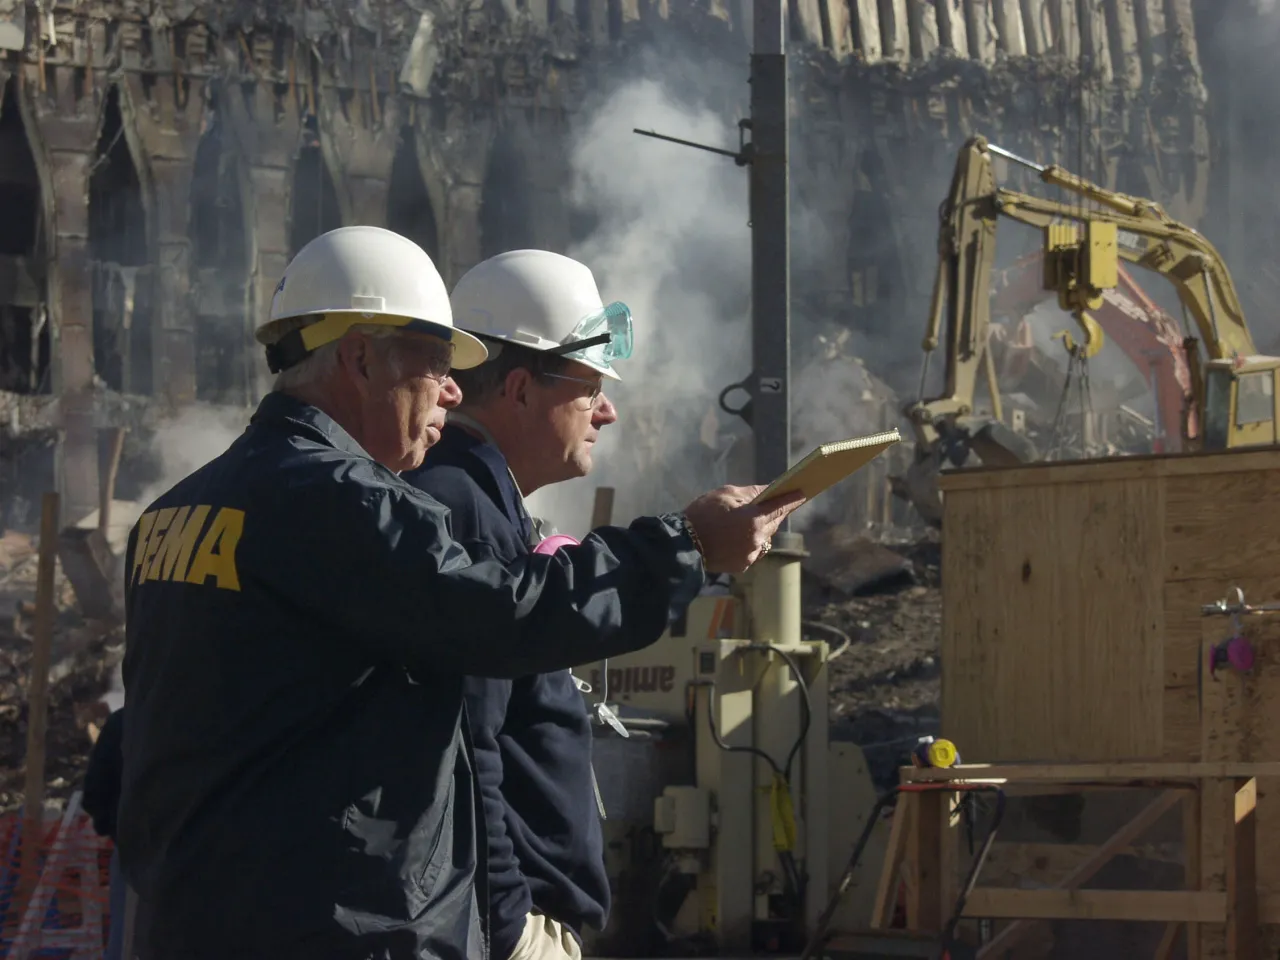 Image: 9/11 FEMA Officials brief on the recovery operations at Ground Zero